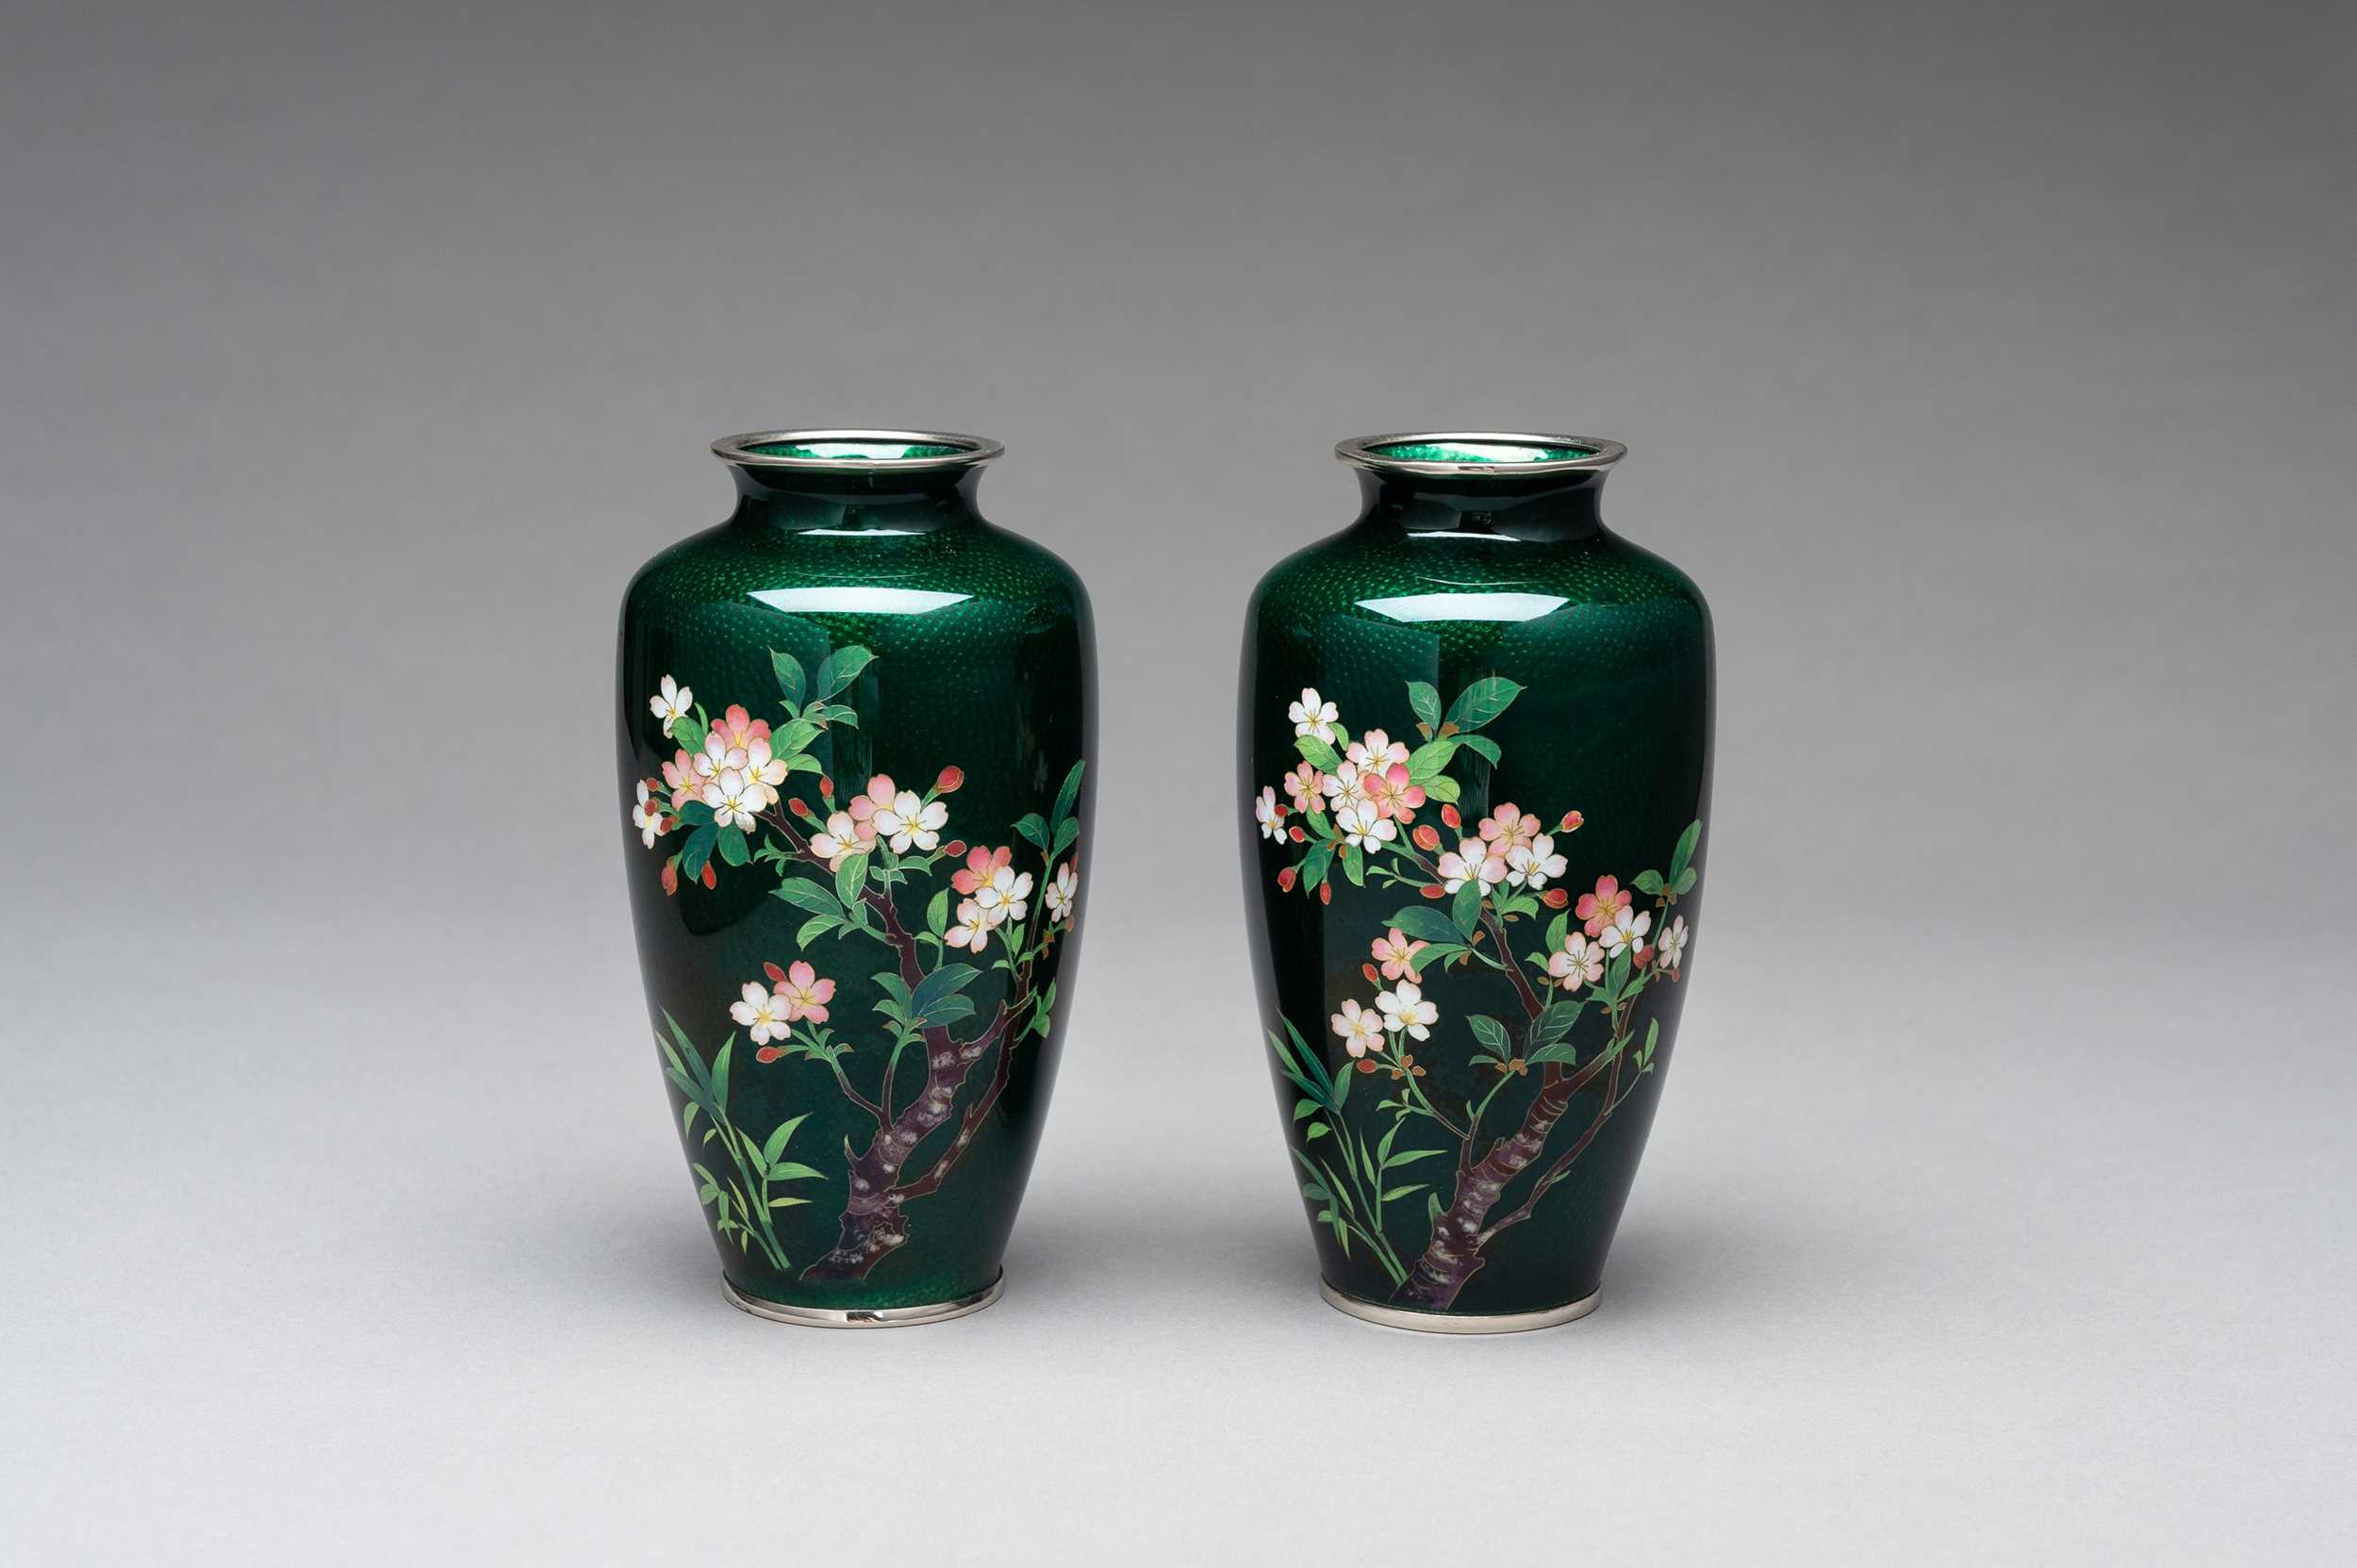 Lot 82 - A PAIR OF ANDO STYLE GINBARI CLOISONNÉ VASES